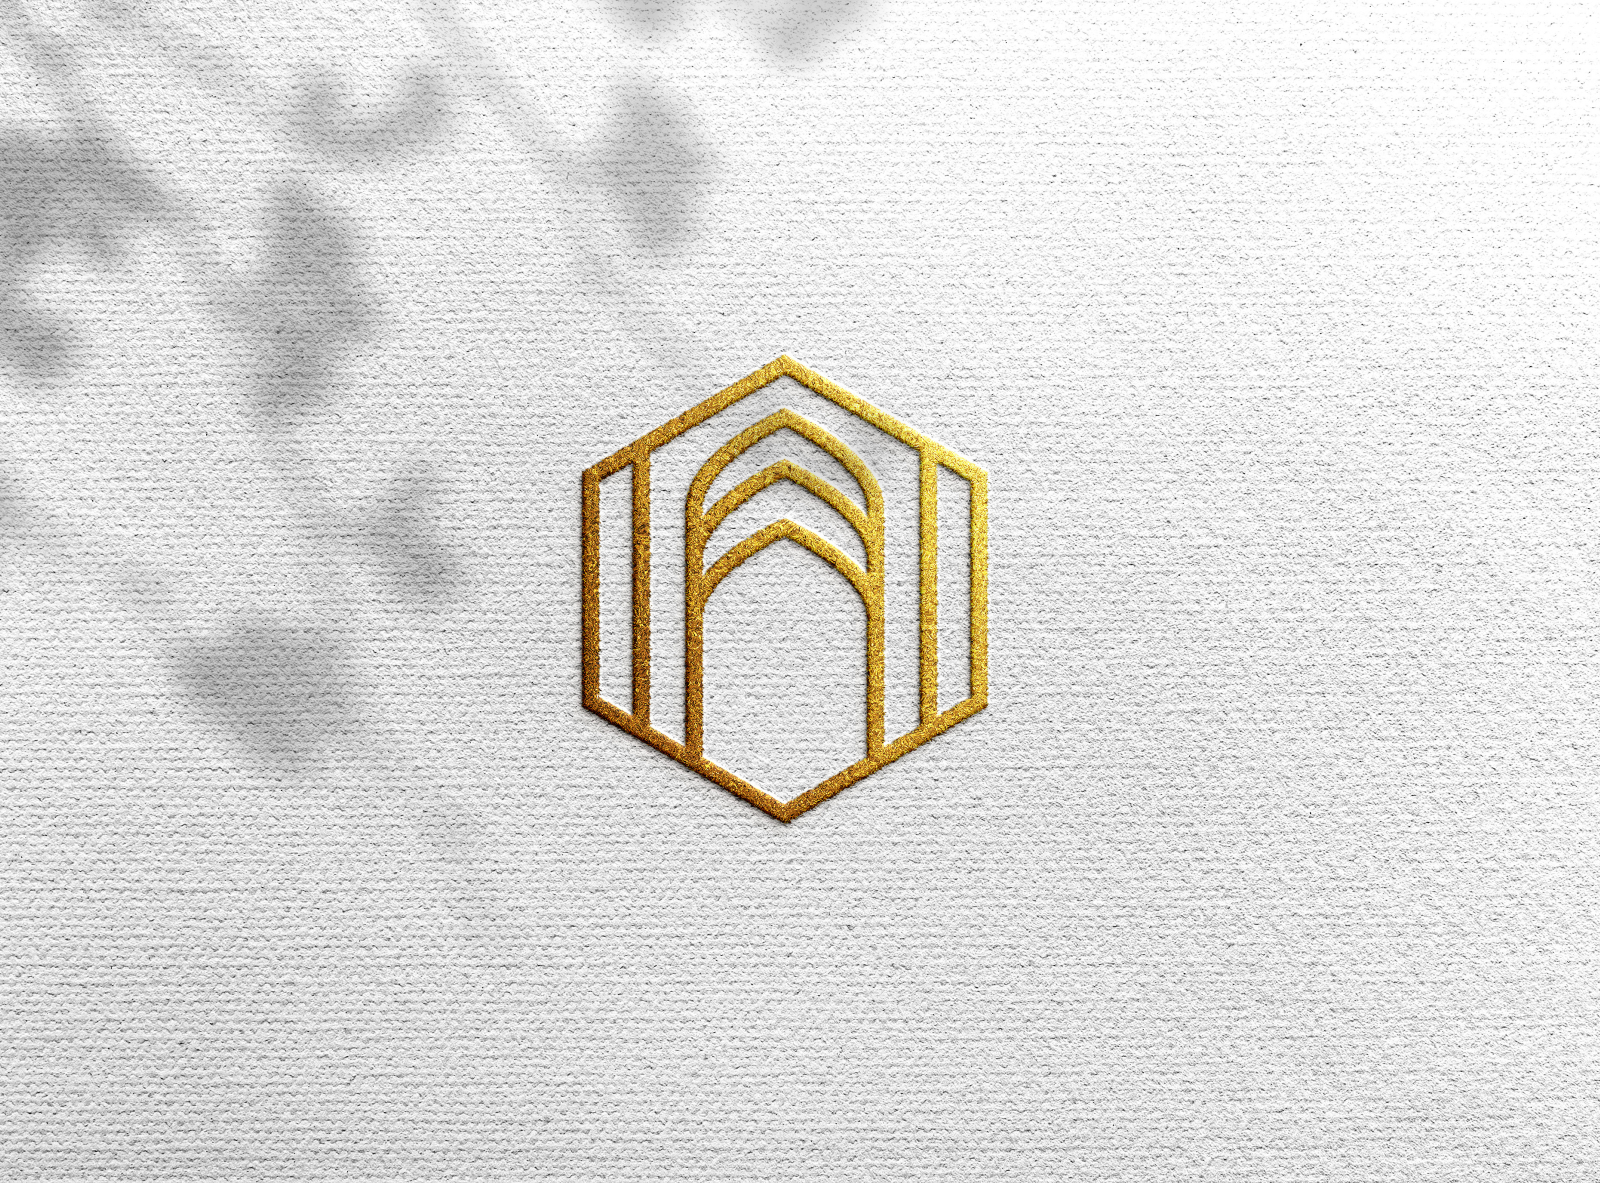 Download Luxury logo mockup on white craft paper | Premium PSD by Mithun Mitra on Dribbble